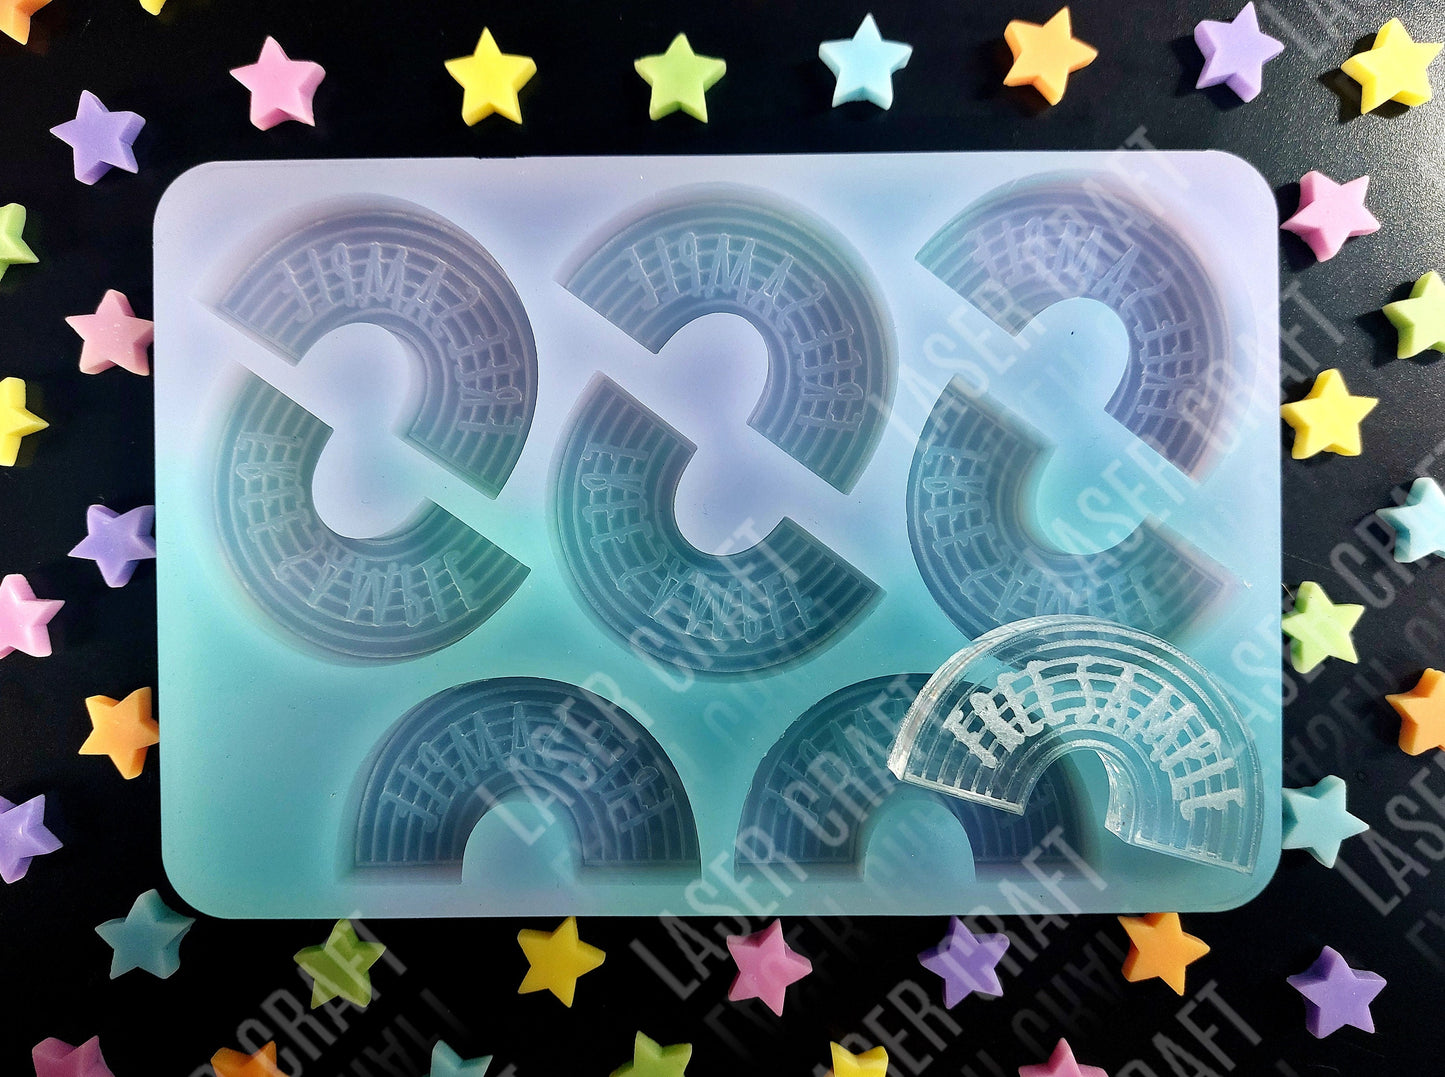 Rainbow Free Sample 8 Cell Silicone Mould for wax, resin etc